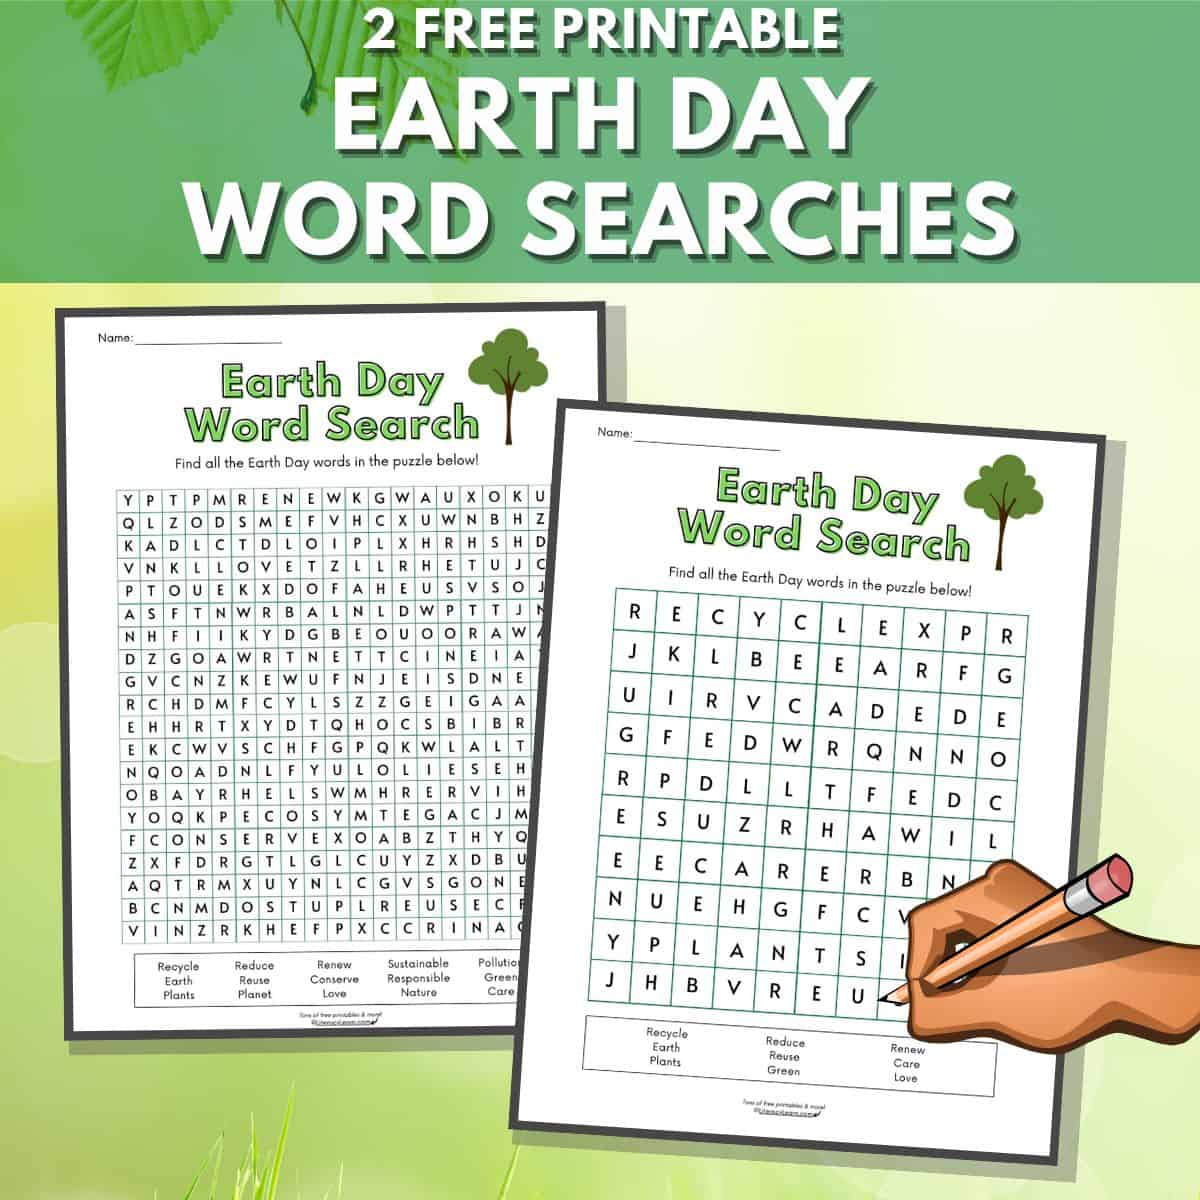 Graphic with 2 earth day word searches on a green leaf background.